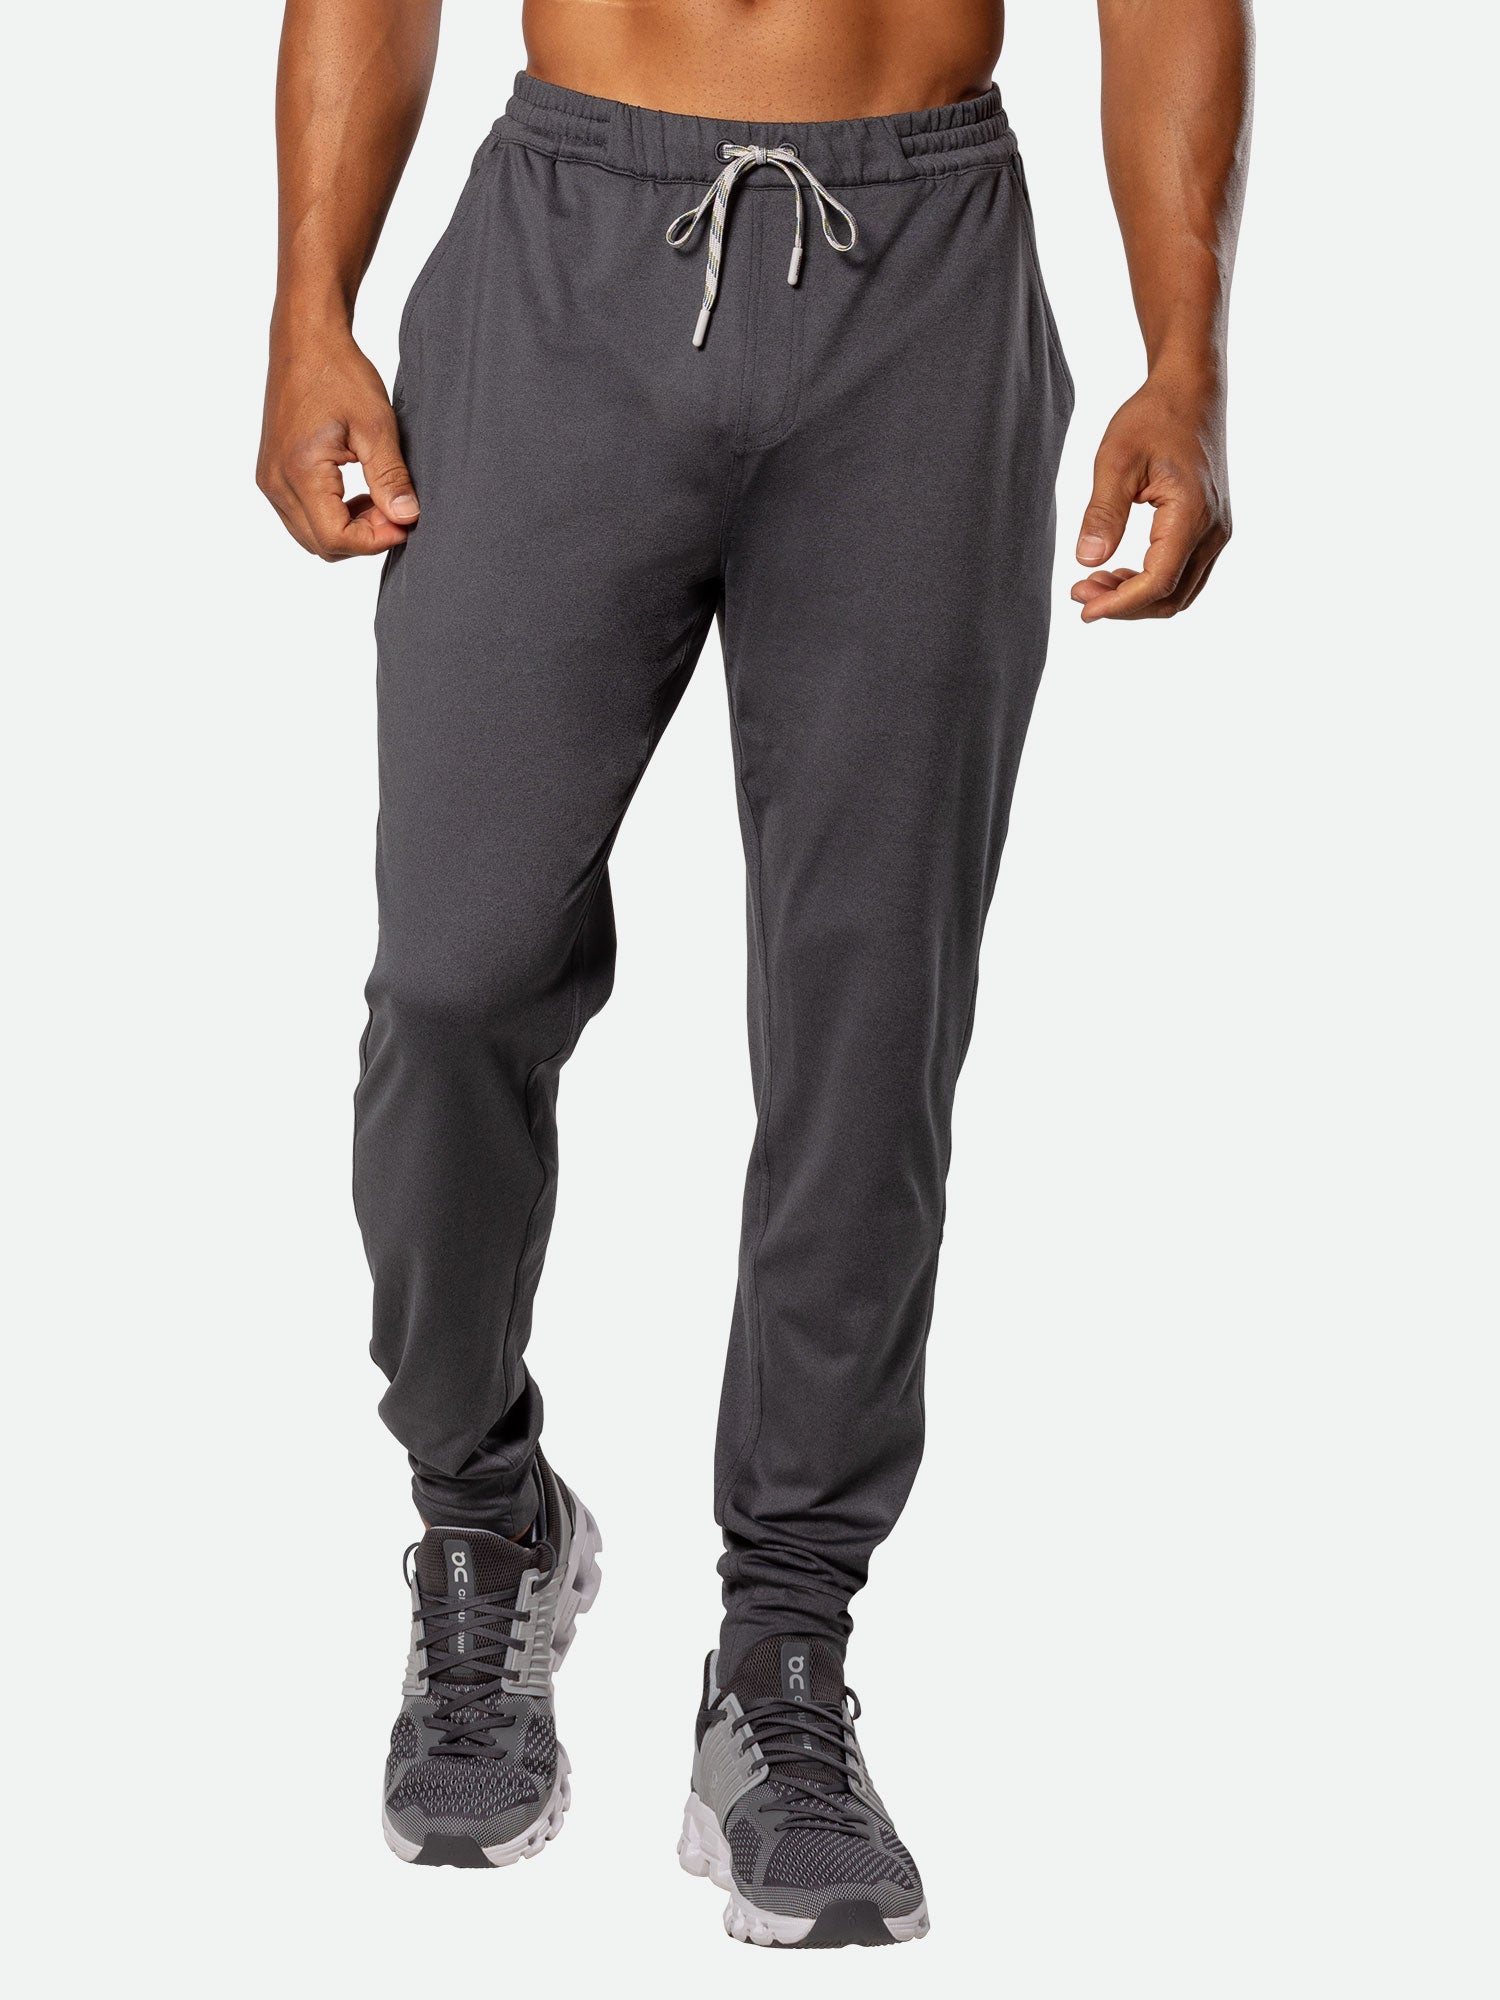 Athletic Works Polyester Athletic Sweat Pants for Men